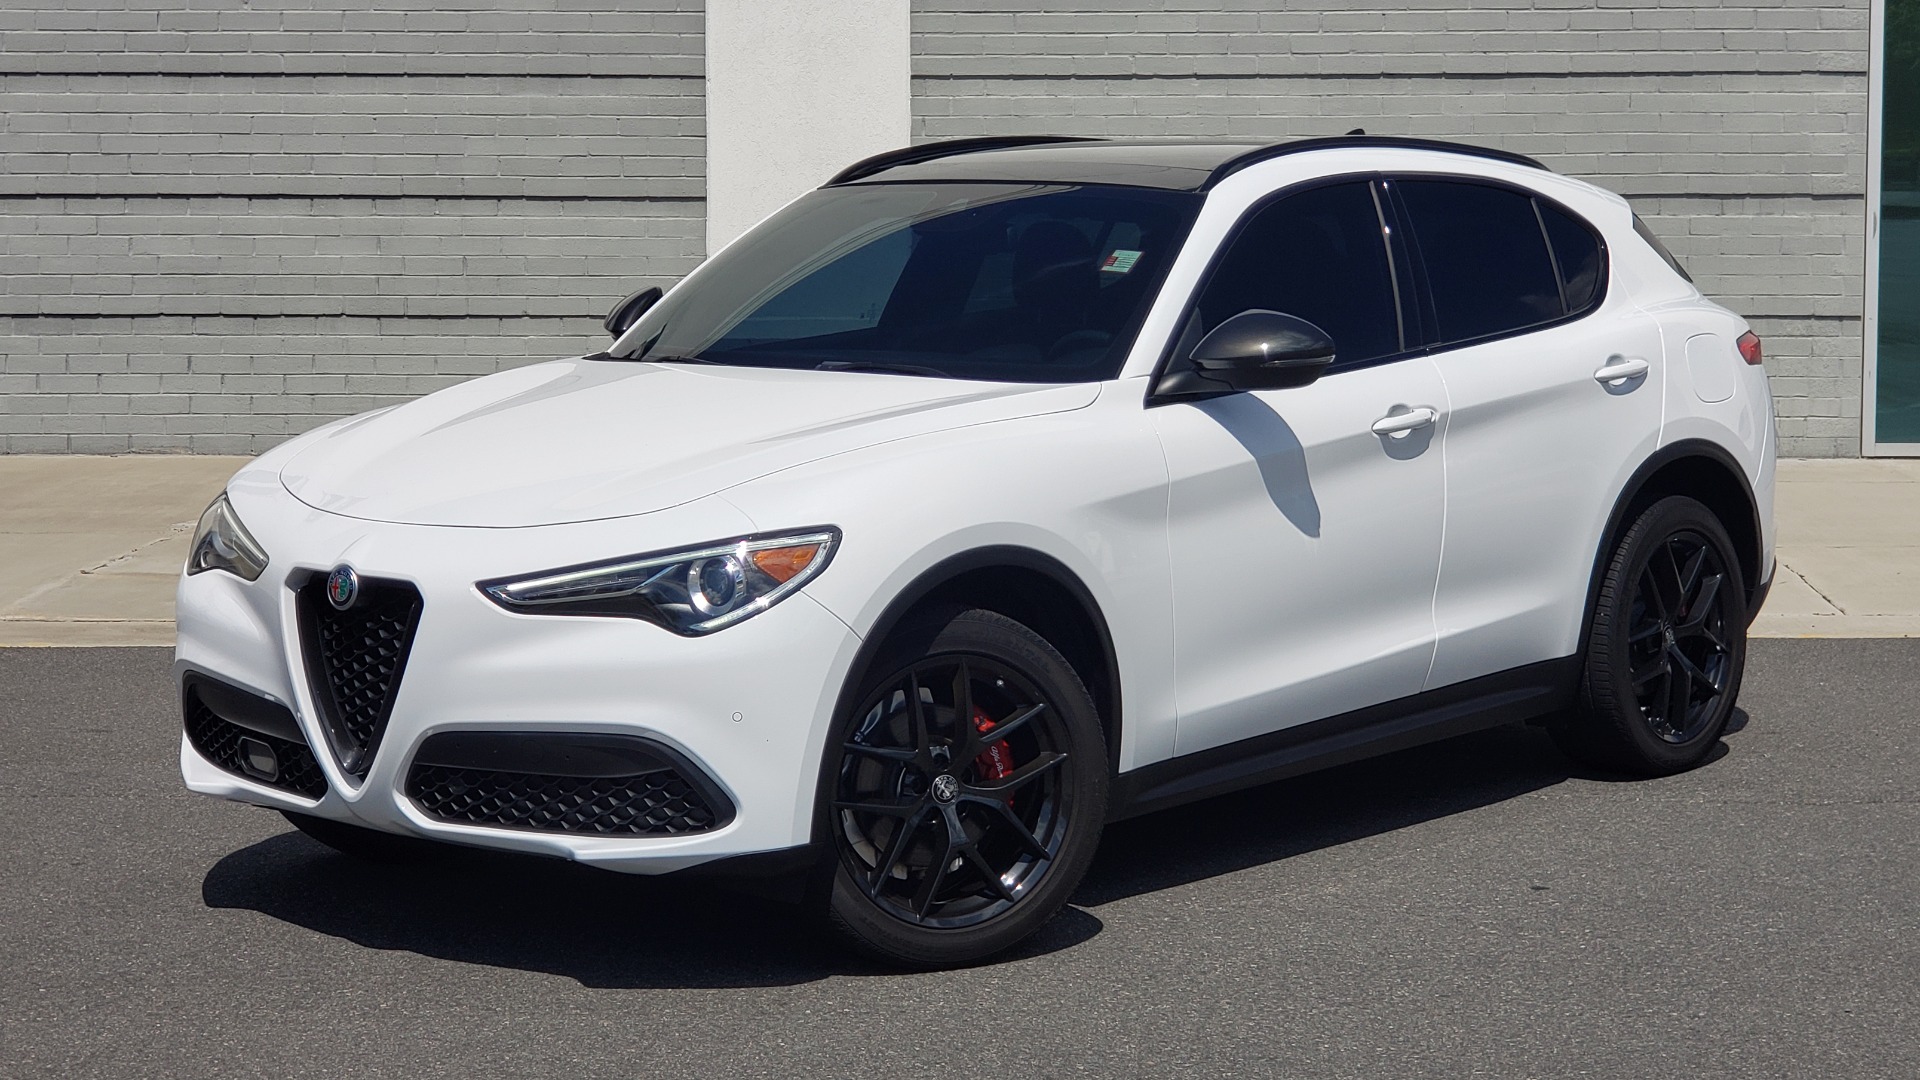 Used 2019 Alfa Romeo STELVIO TI SPORT AWD / 2.0L TURBO / 8-SPD AUTO / DRVR ASST / REARVIEW for sale Sold at Formula Imports in Charlotte NC 28227 3